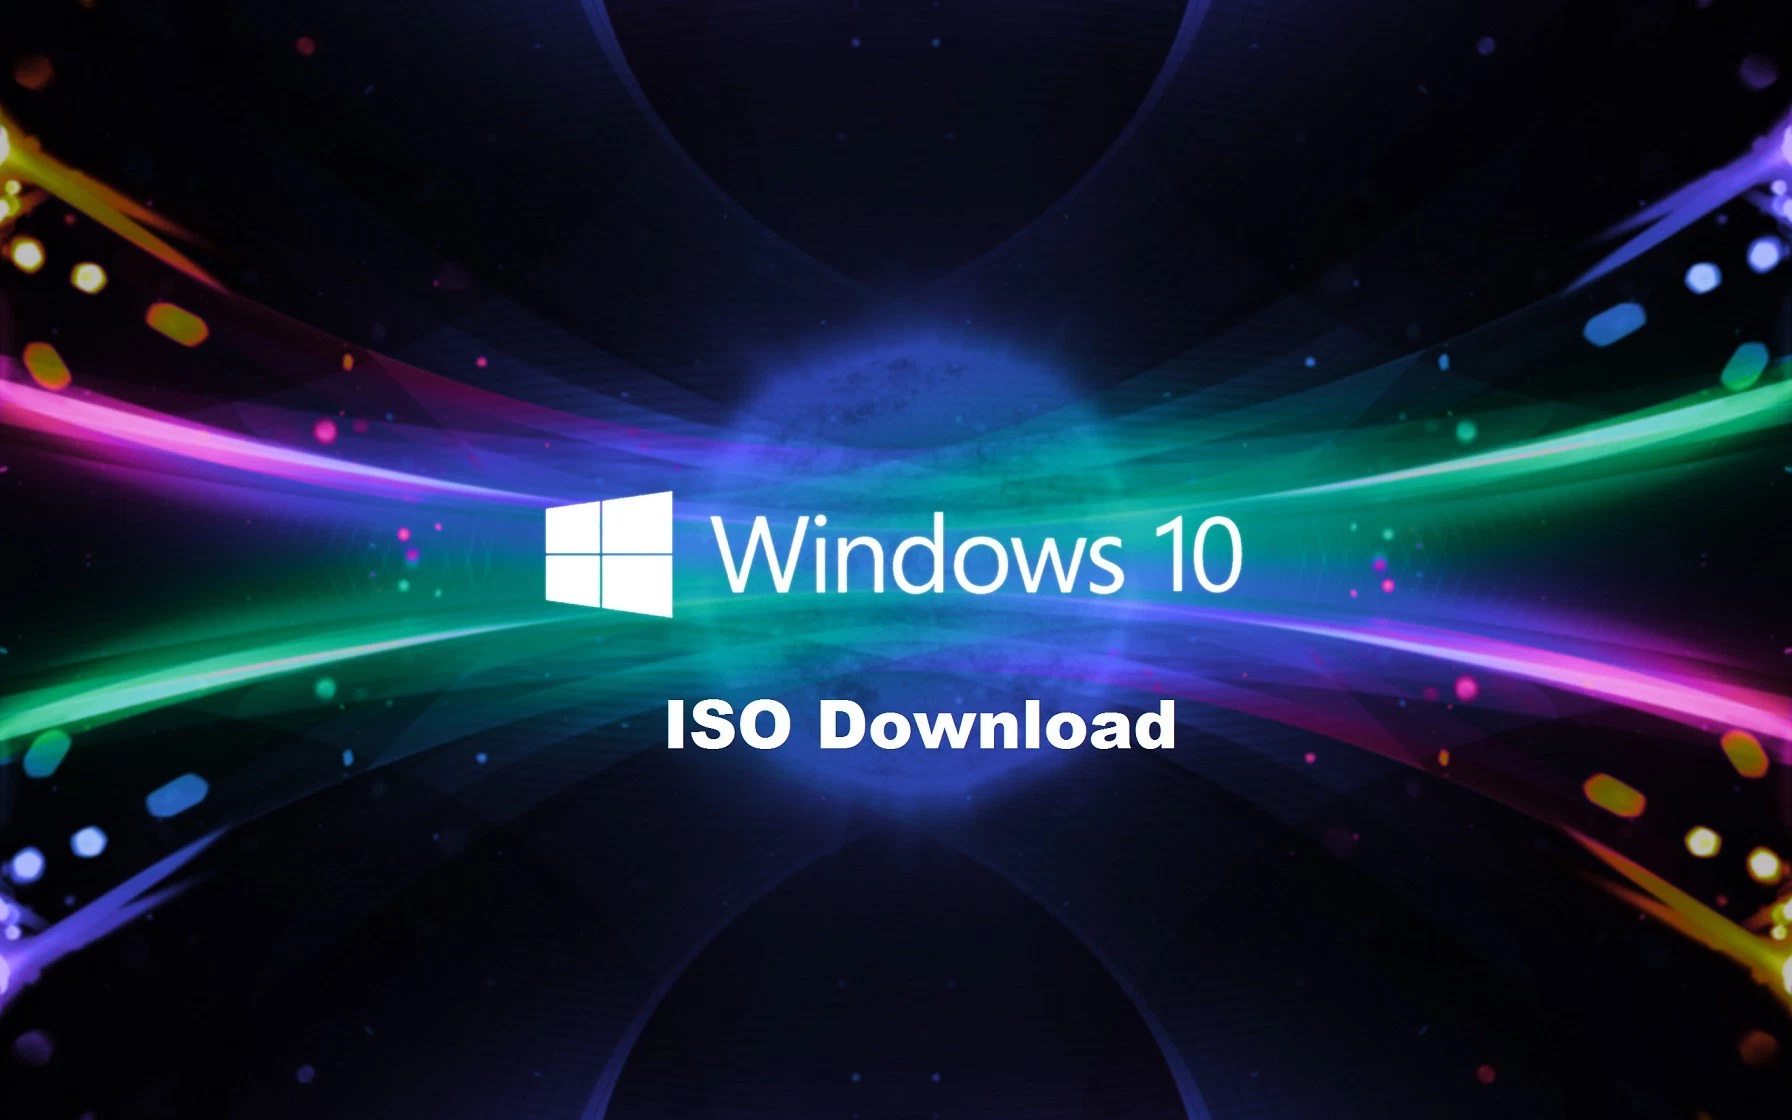 download iso windows 10